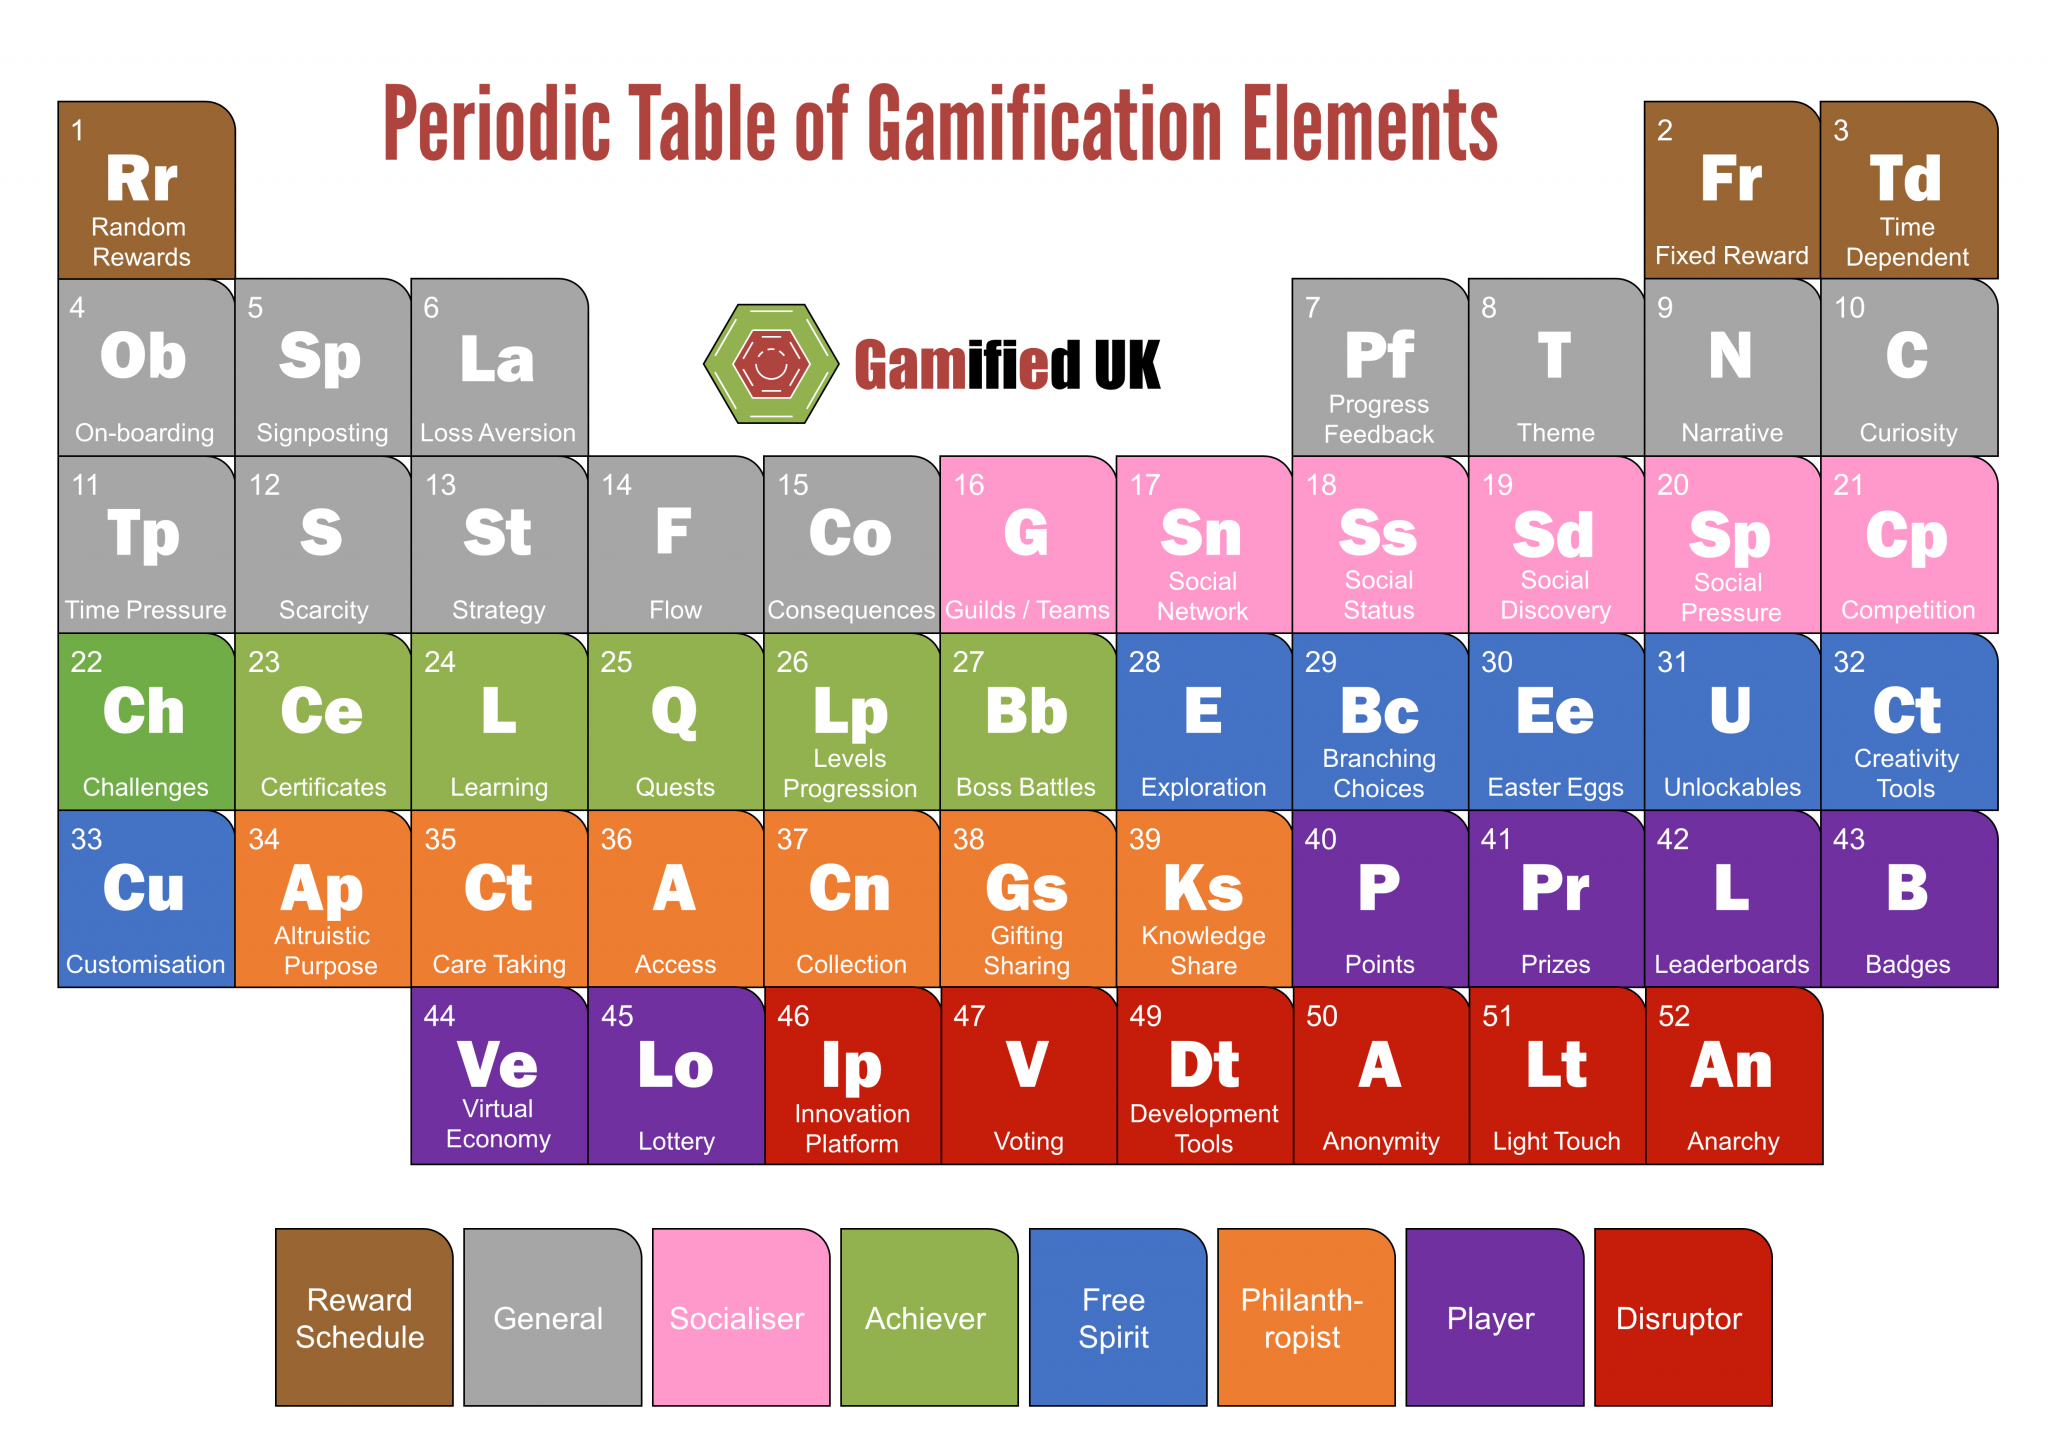 Periodic Table of Gamification Elements